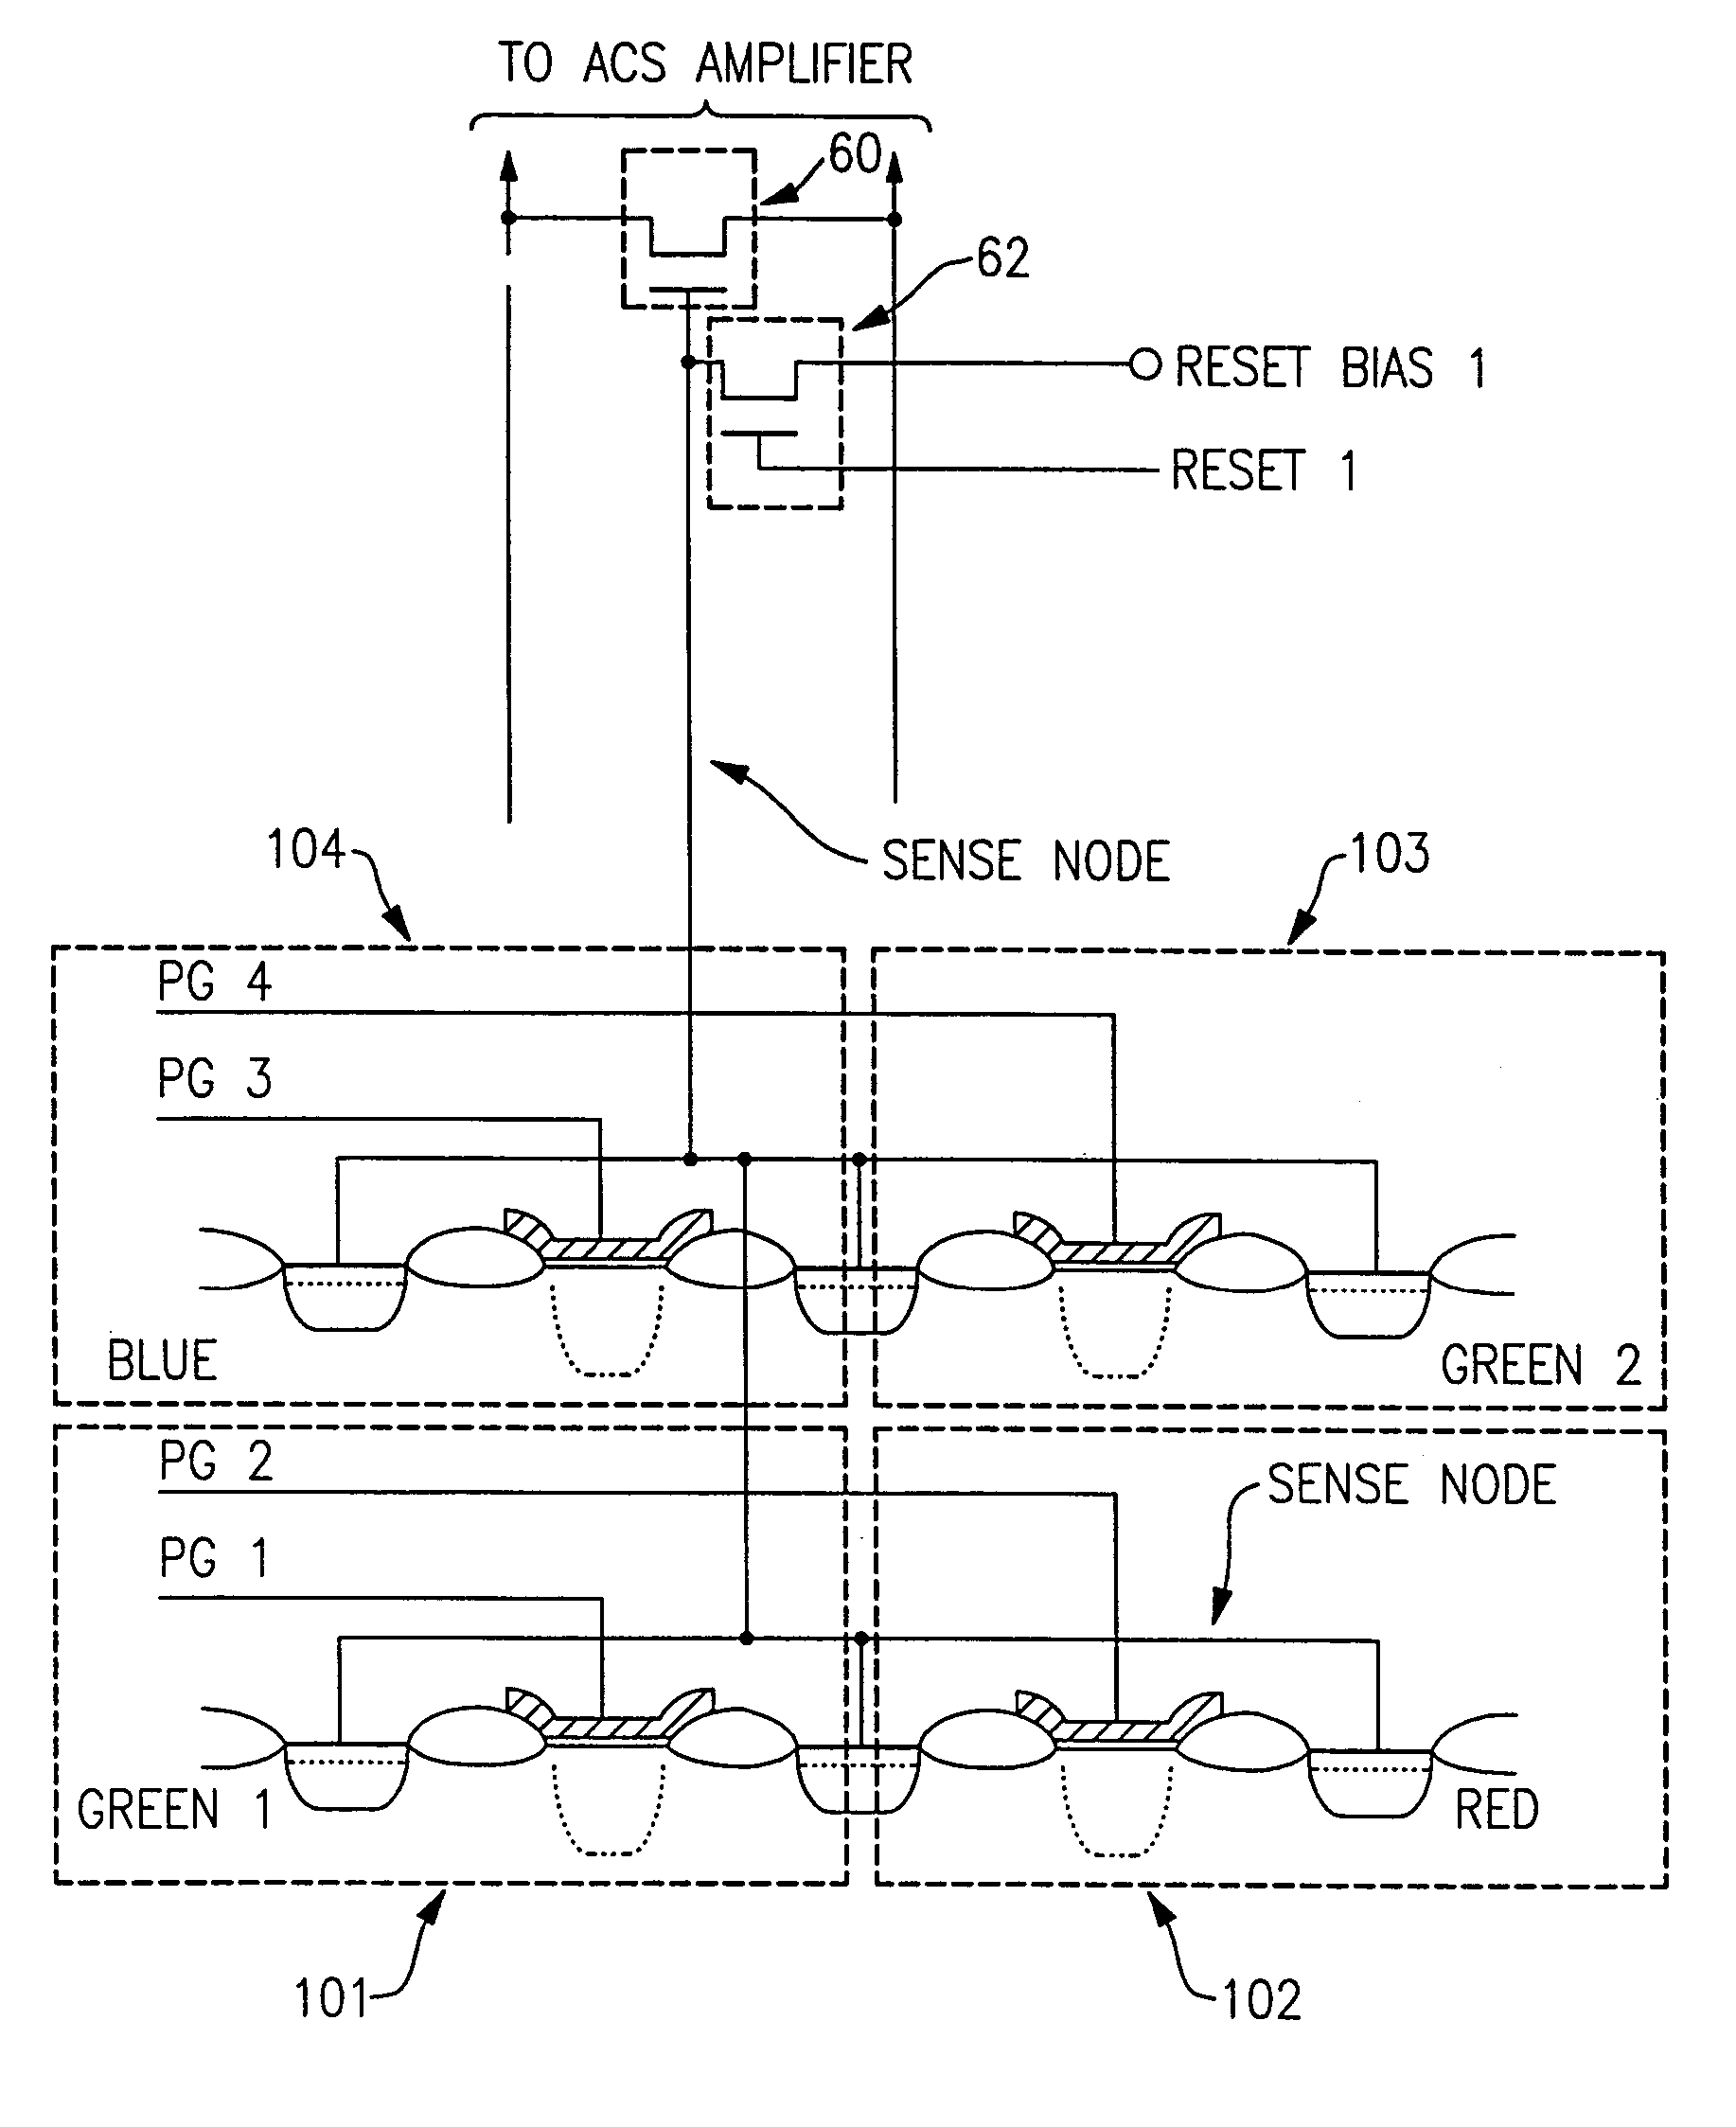 Solid state imager with reduced number of transistors per pixel